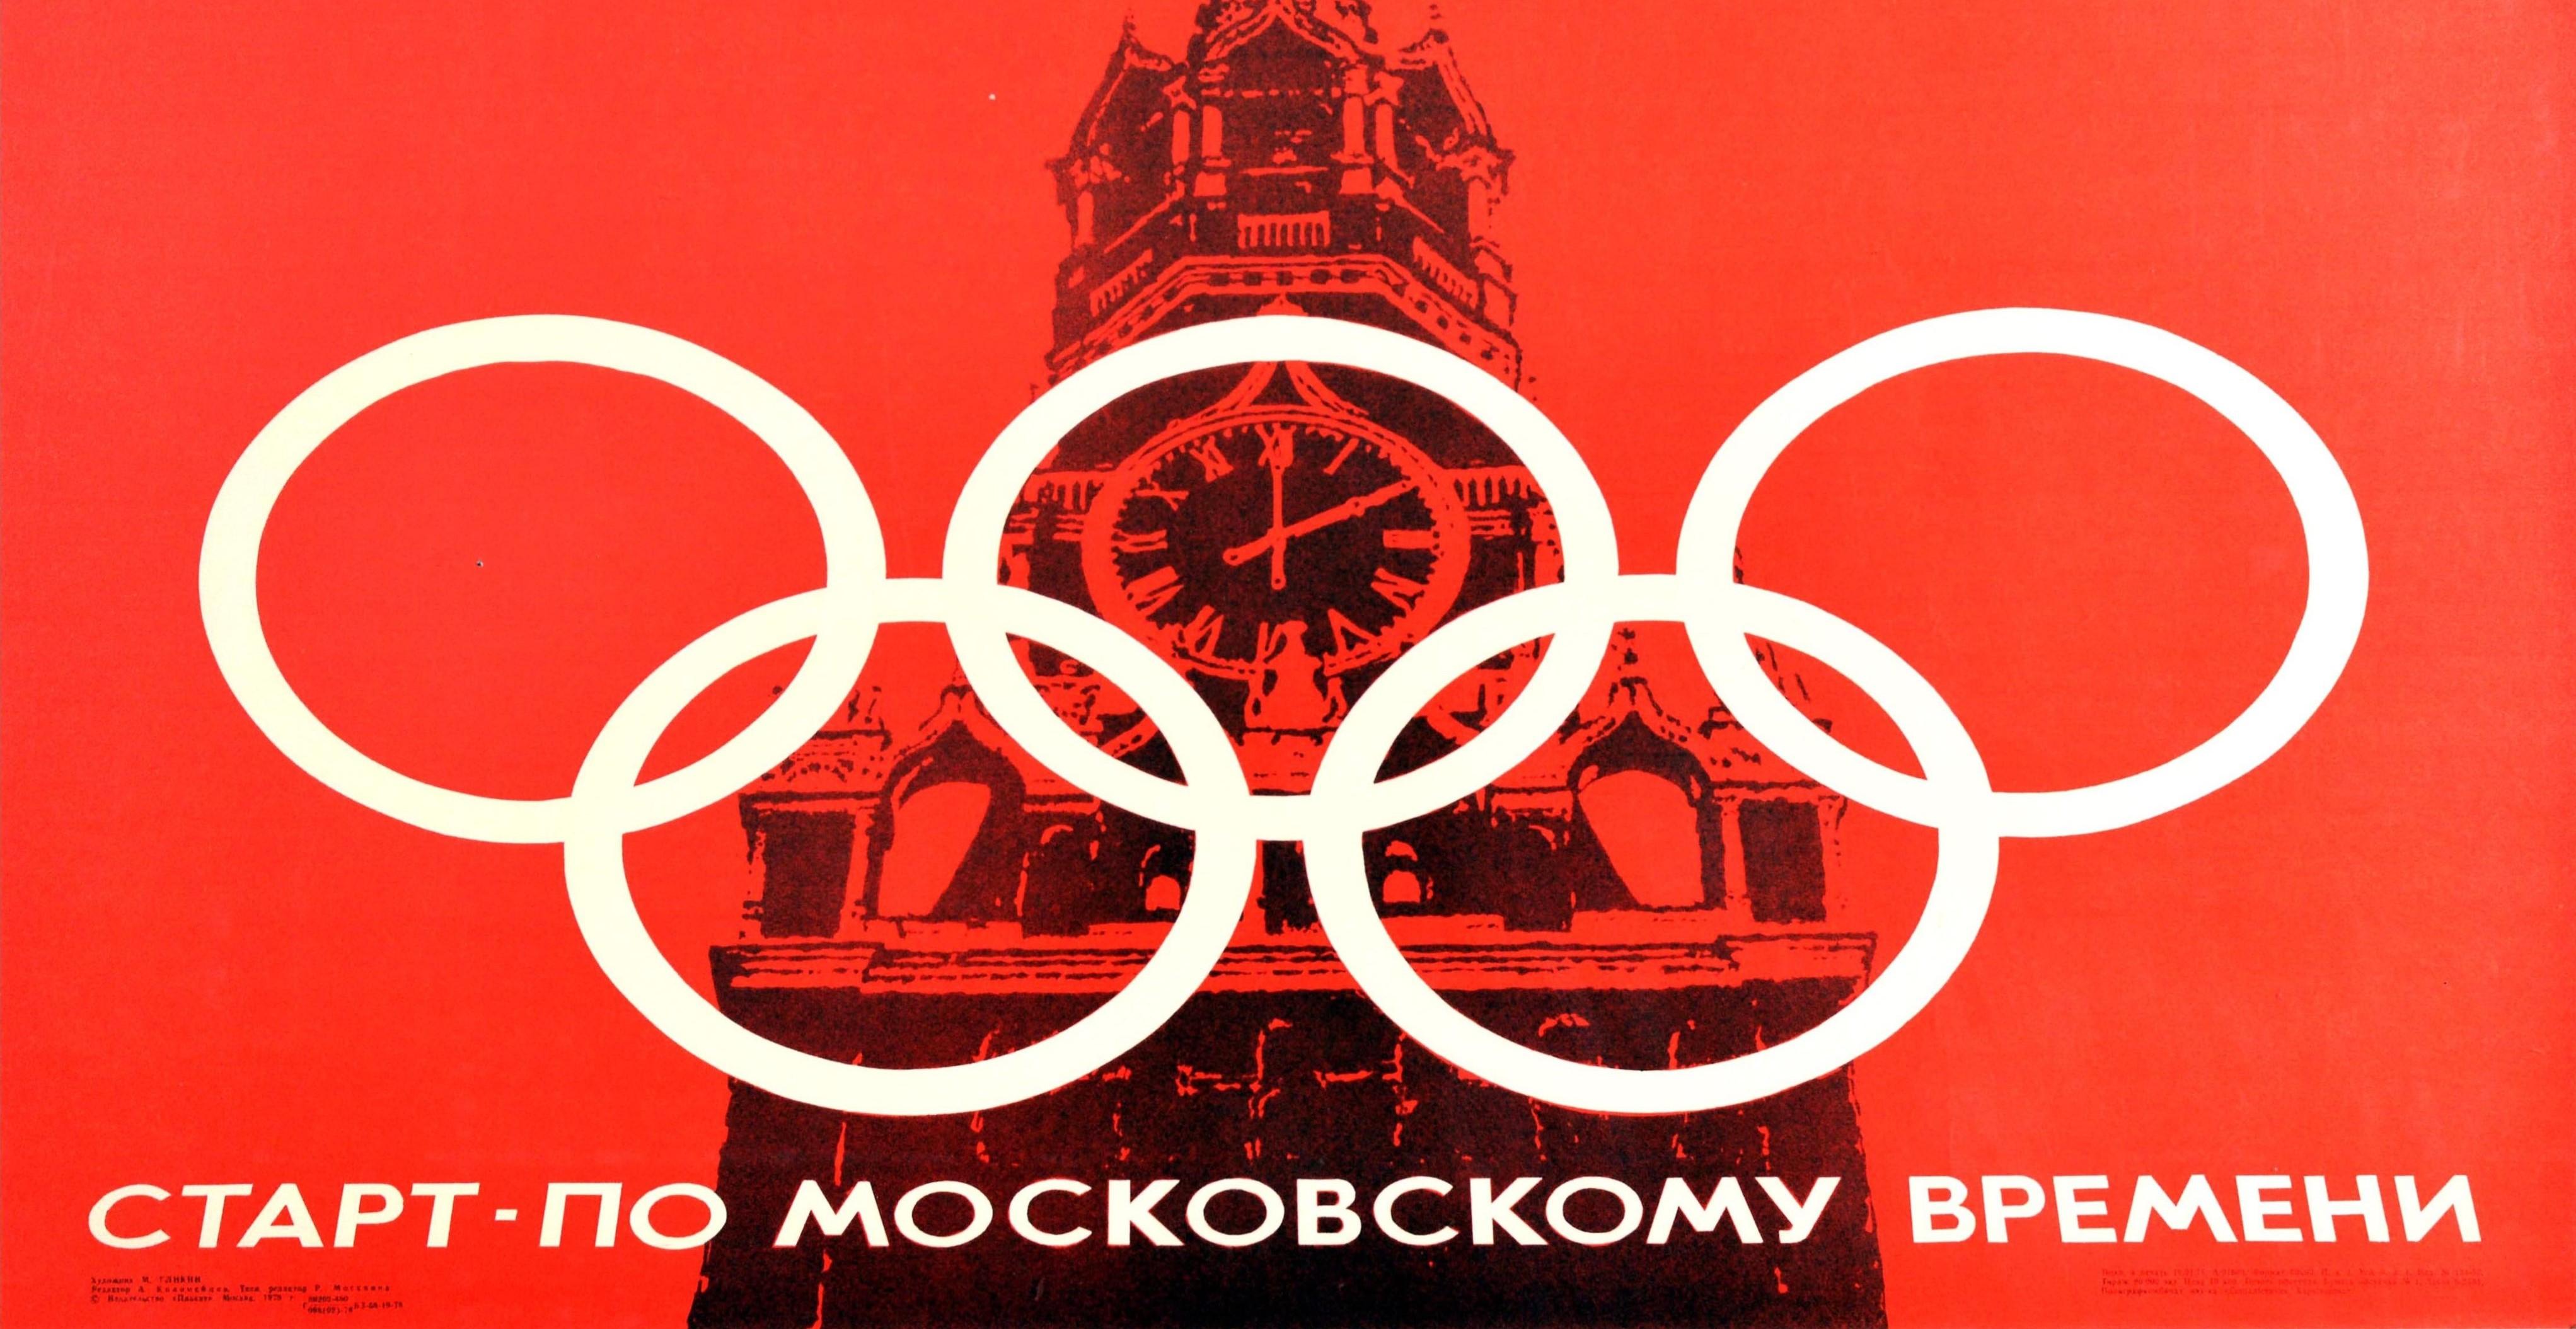 Original Vintage Poster 1980 Olympic Games Start On Moscow Time Kremlin Clock In Good Condition For Sale In London, GB